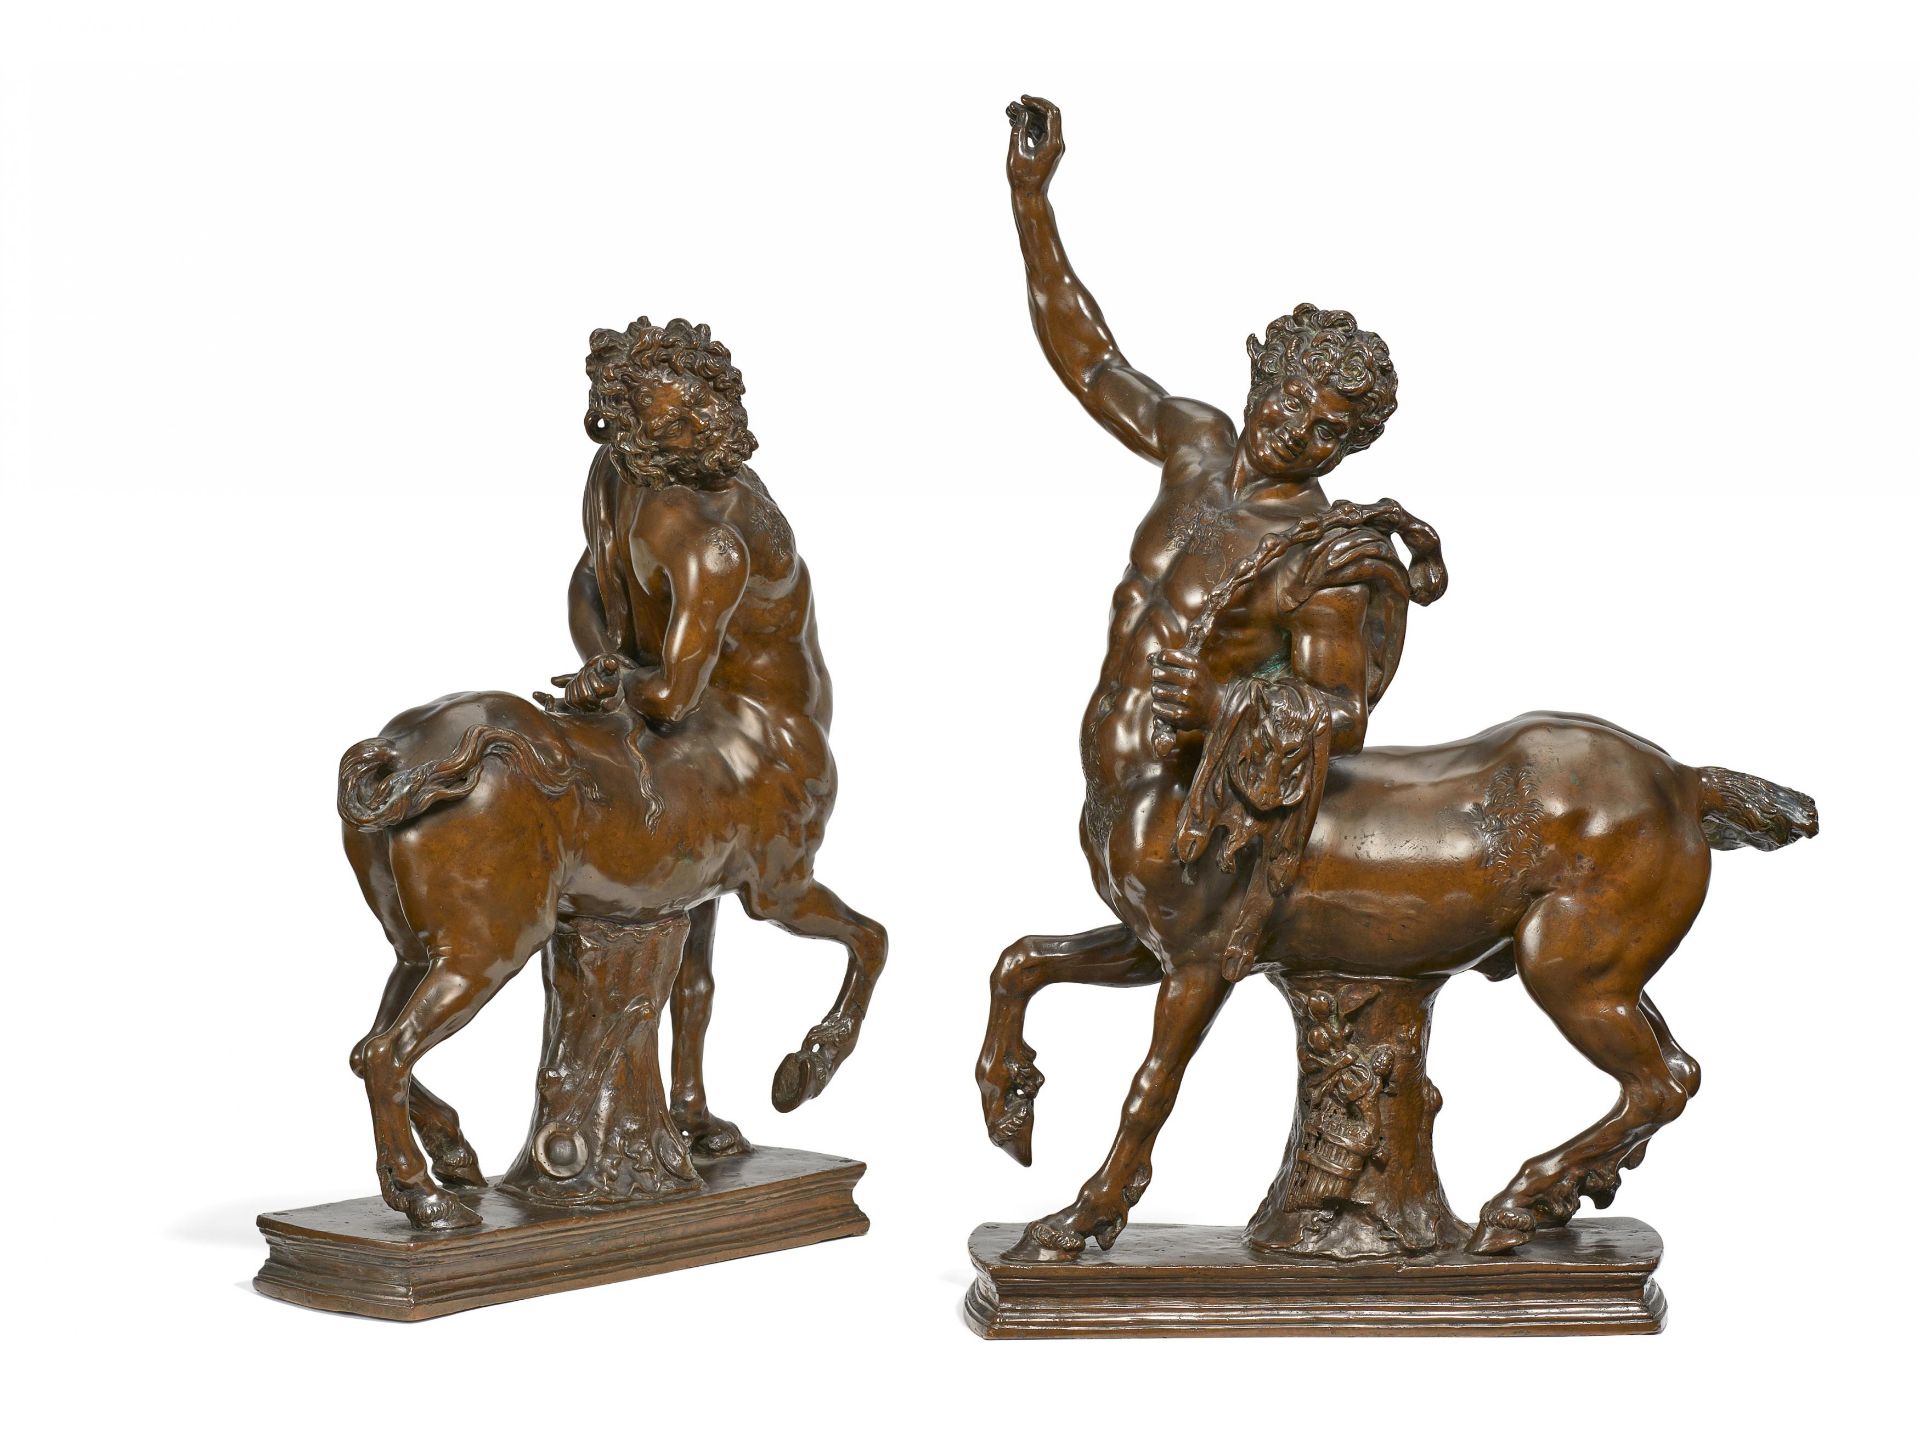 TWO BRONZE CENTAURS, A YOUNG AND AN OLD SO CALLED FURIETTI CENTAUR. Italy. Presumably 19th